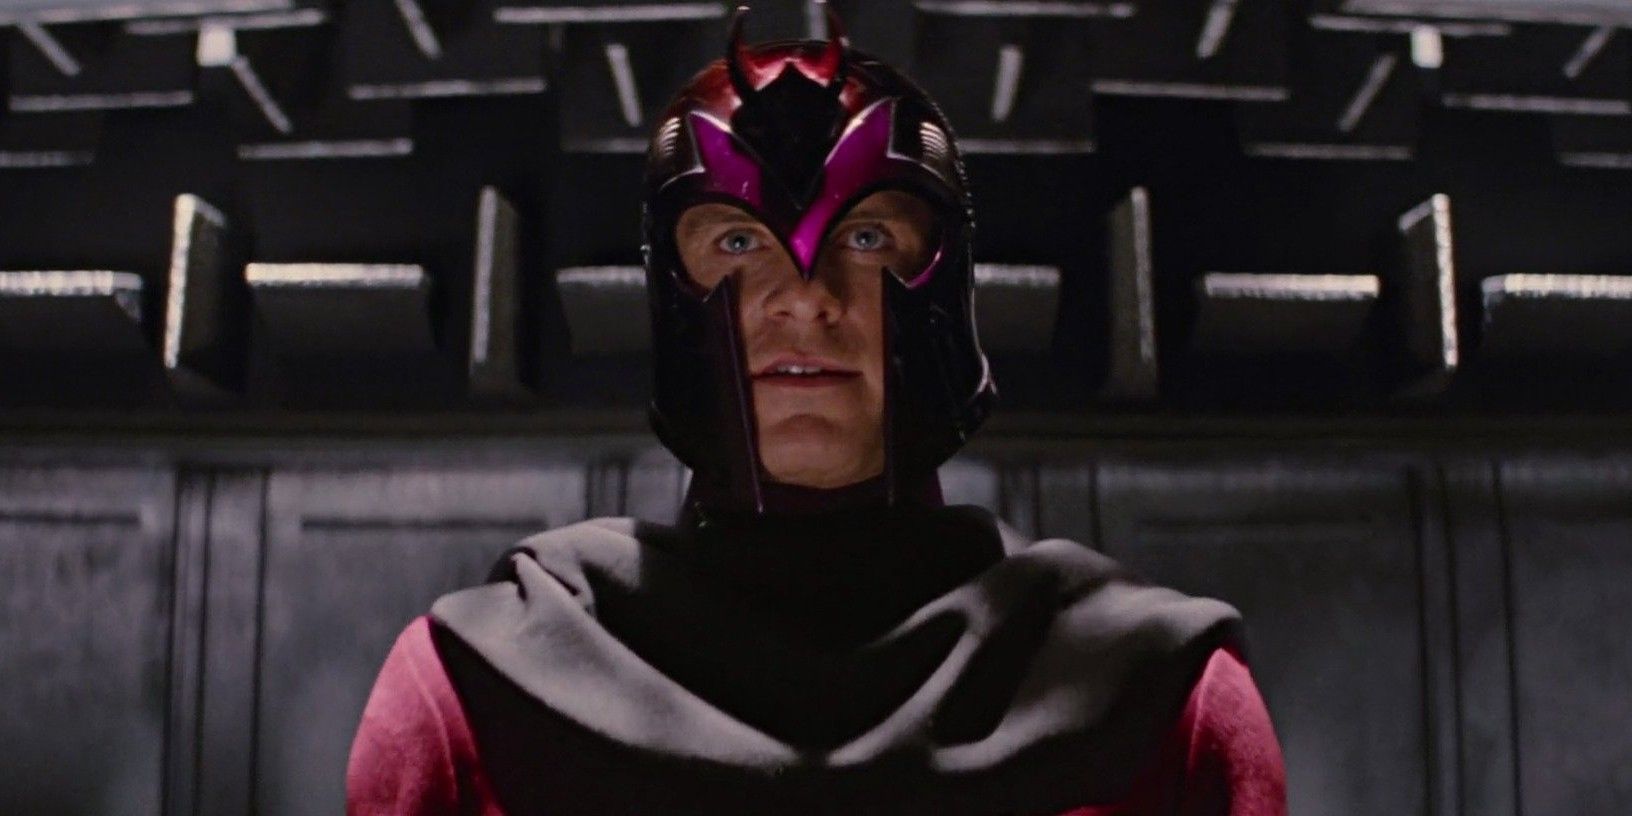 Magneto wears a comic accurate red costume